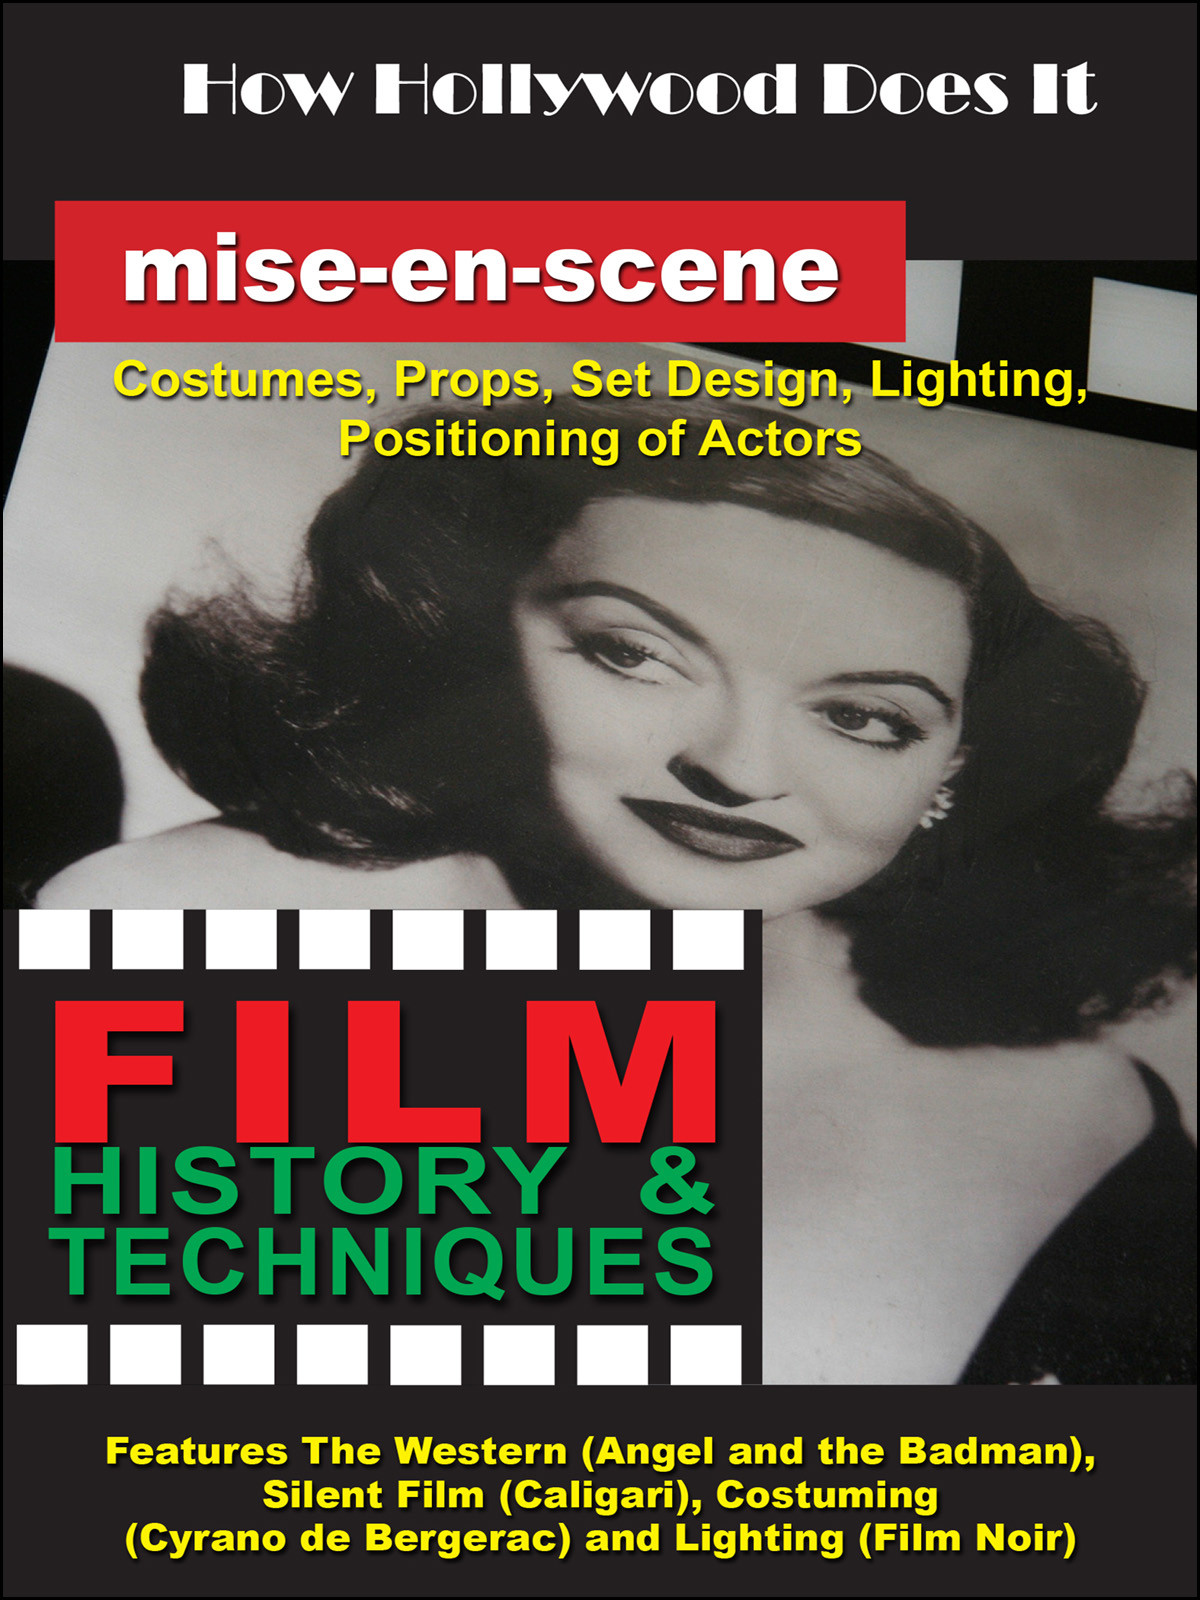 F2714 - How Hollywood Does It - Film History & Techniques of Mise-en-scene